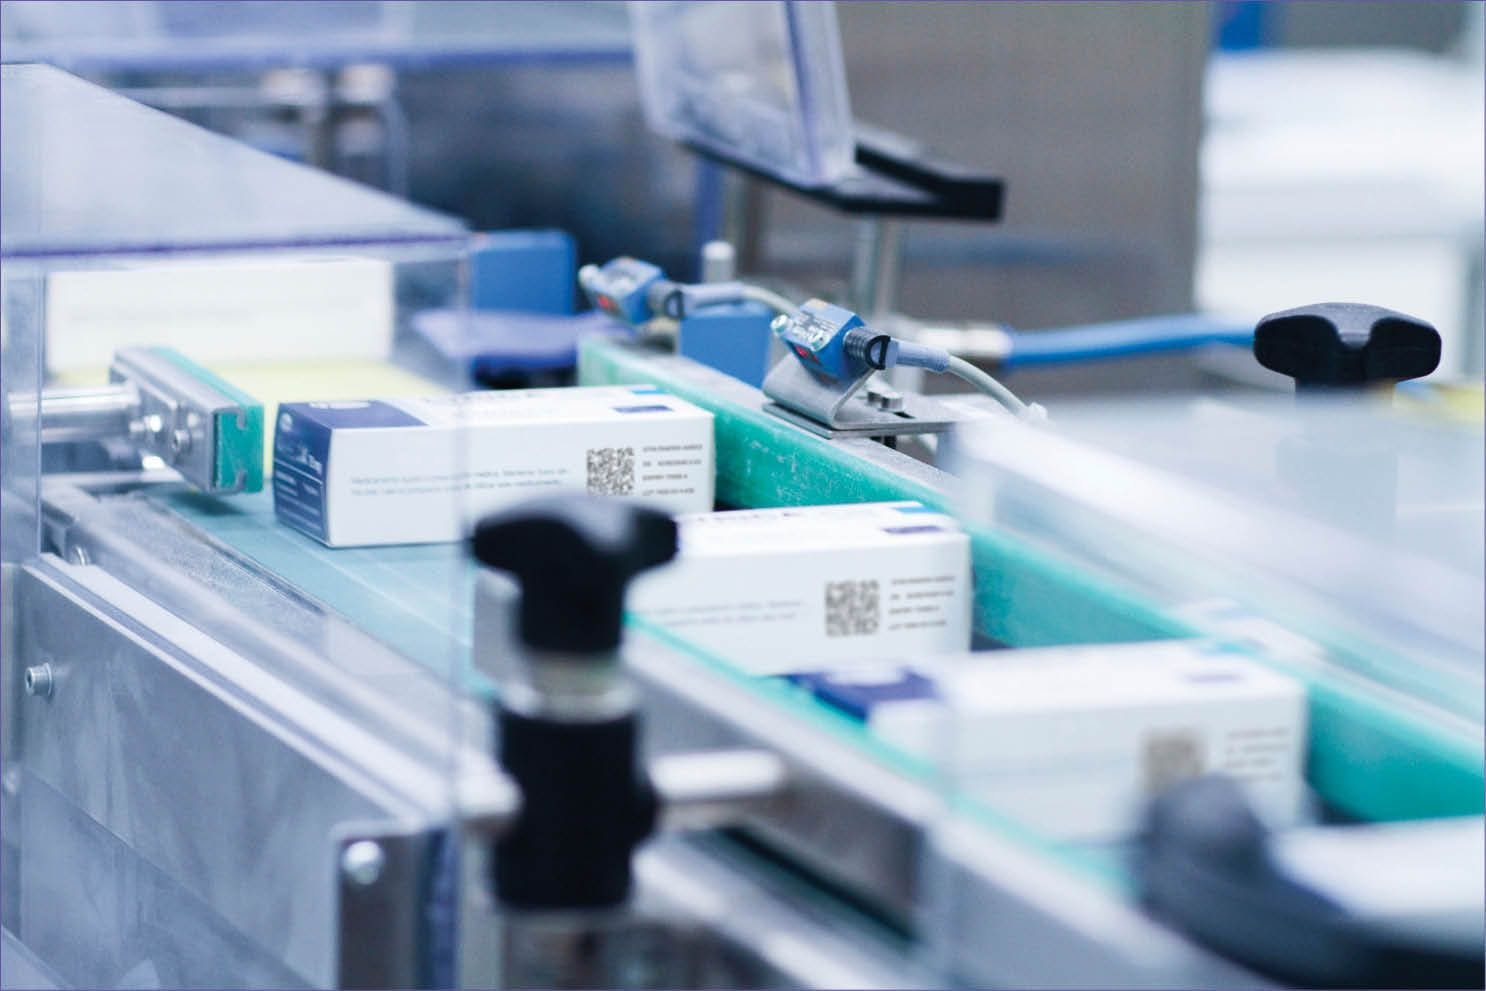 GS1 standards are vital for pharma serialization